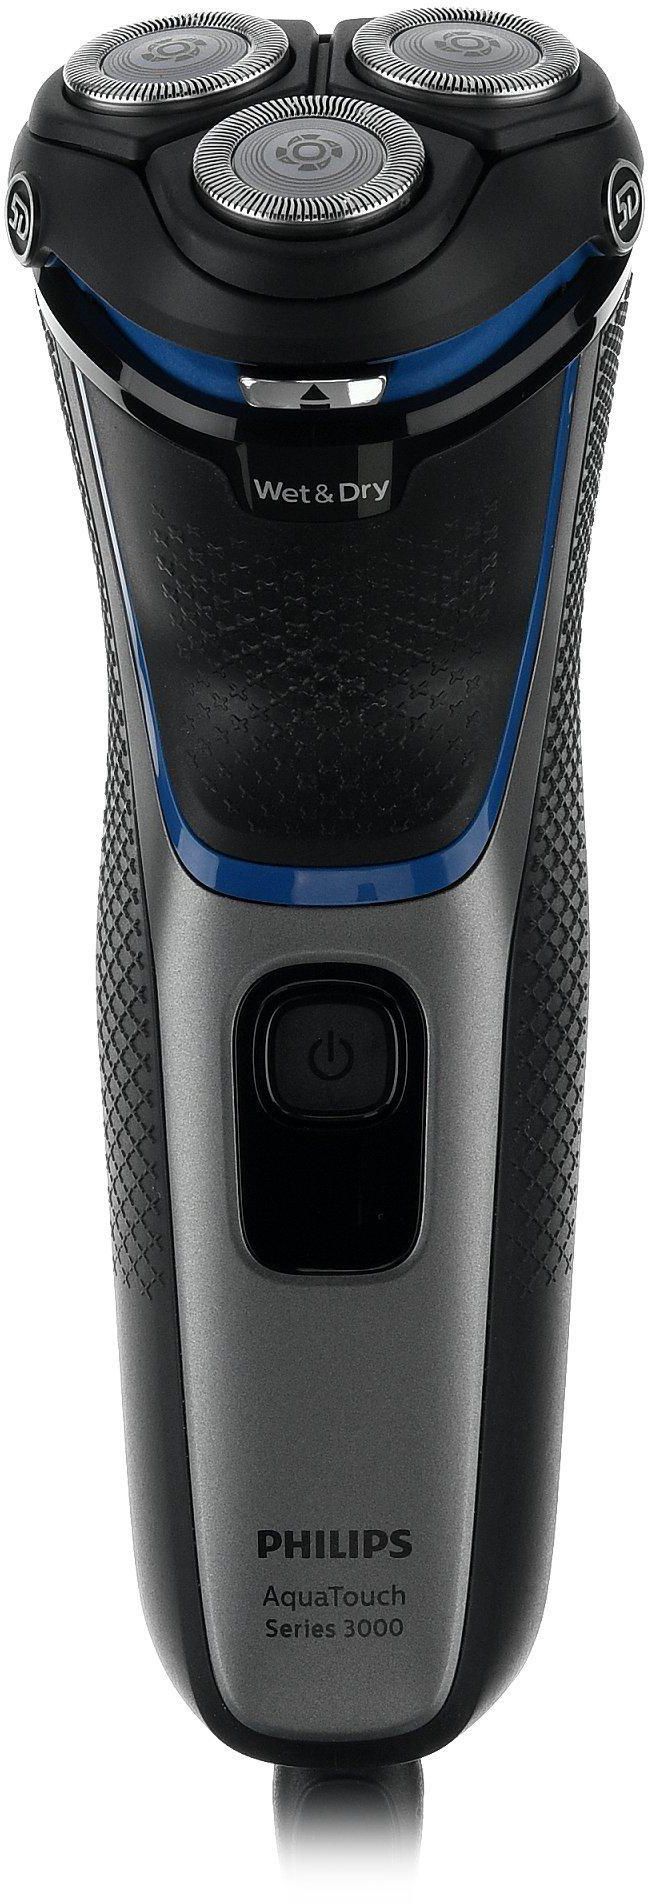 Philips Aquatouch 3000 Rechargable Shaver We and Dry